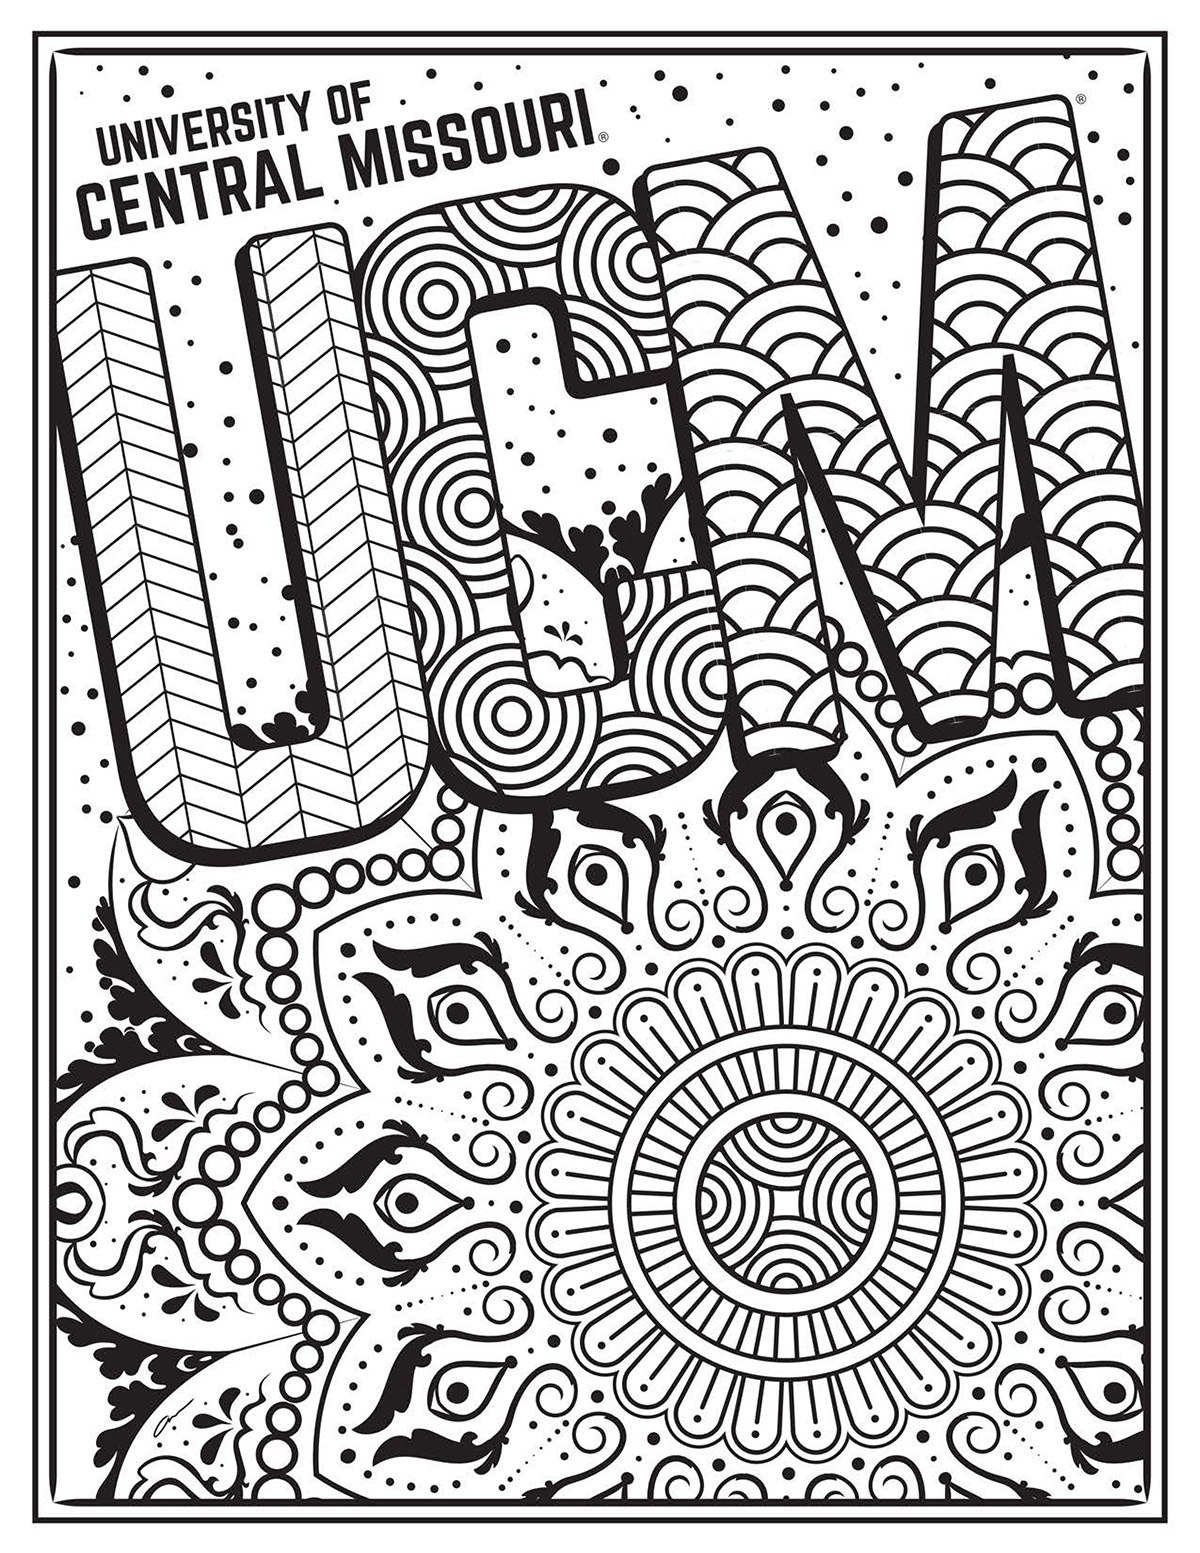 UCM Coloring Page